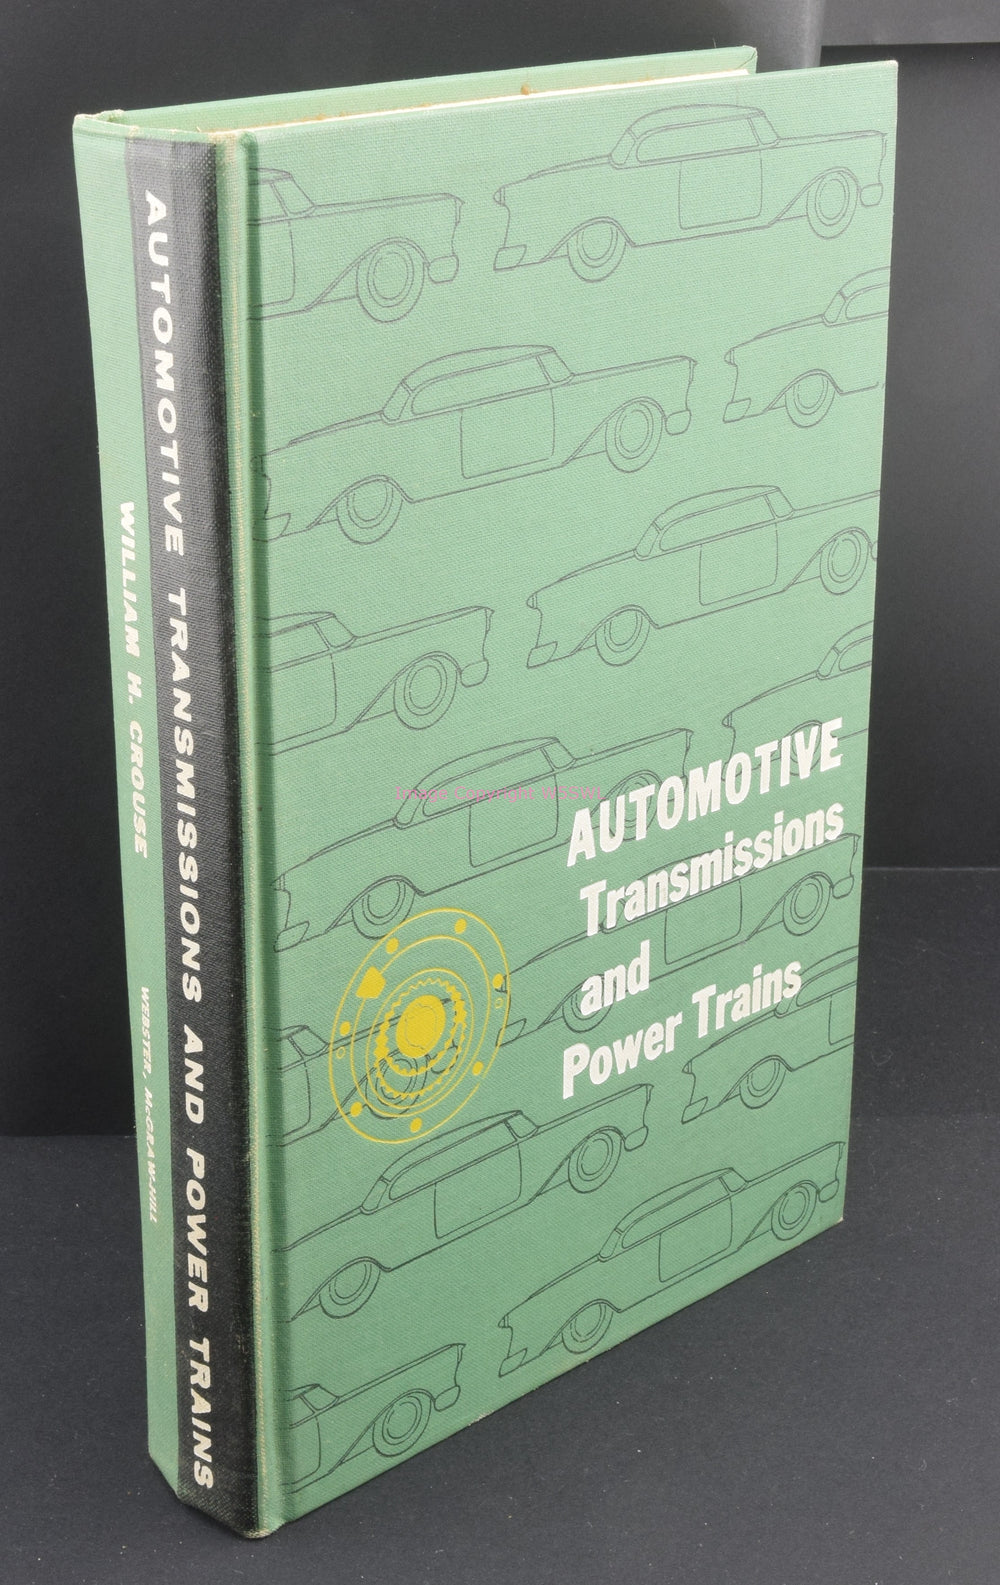 Automotive Transmissions and Power Trains - Dave's Hobby Shop by W5SWL